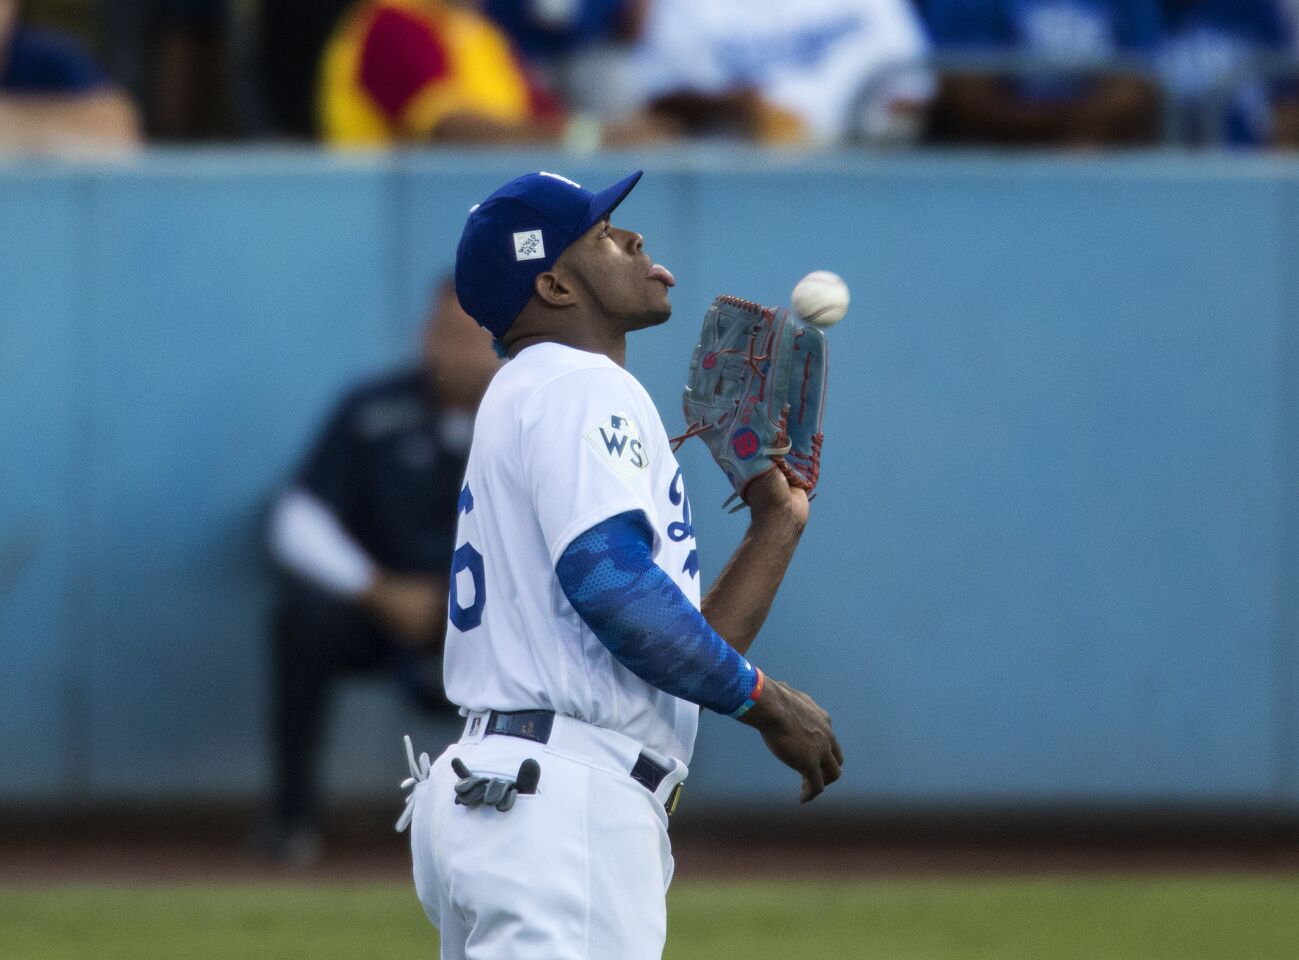 Dodgers right fielder Yasiel Puig catches a fly ball hit by Astros shortstop Carlos Correa with his tongue out during the first inning of Game 2.